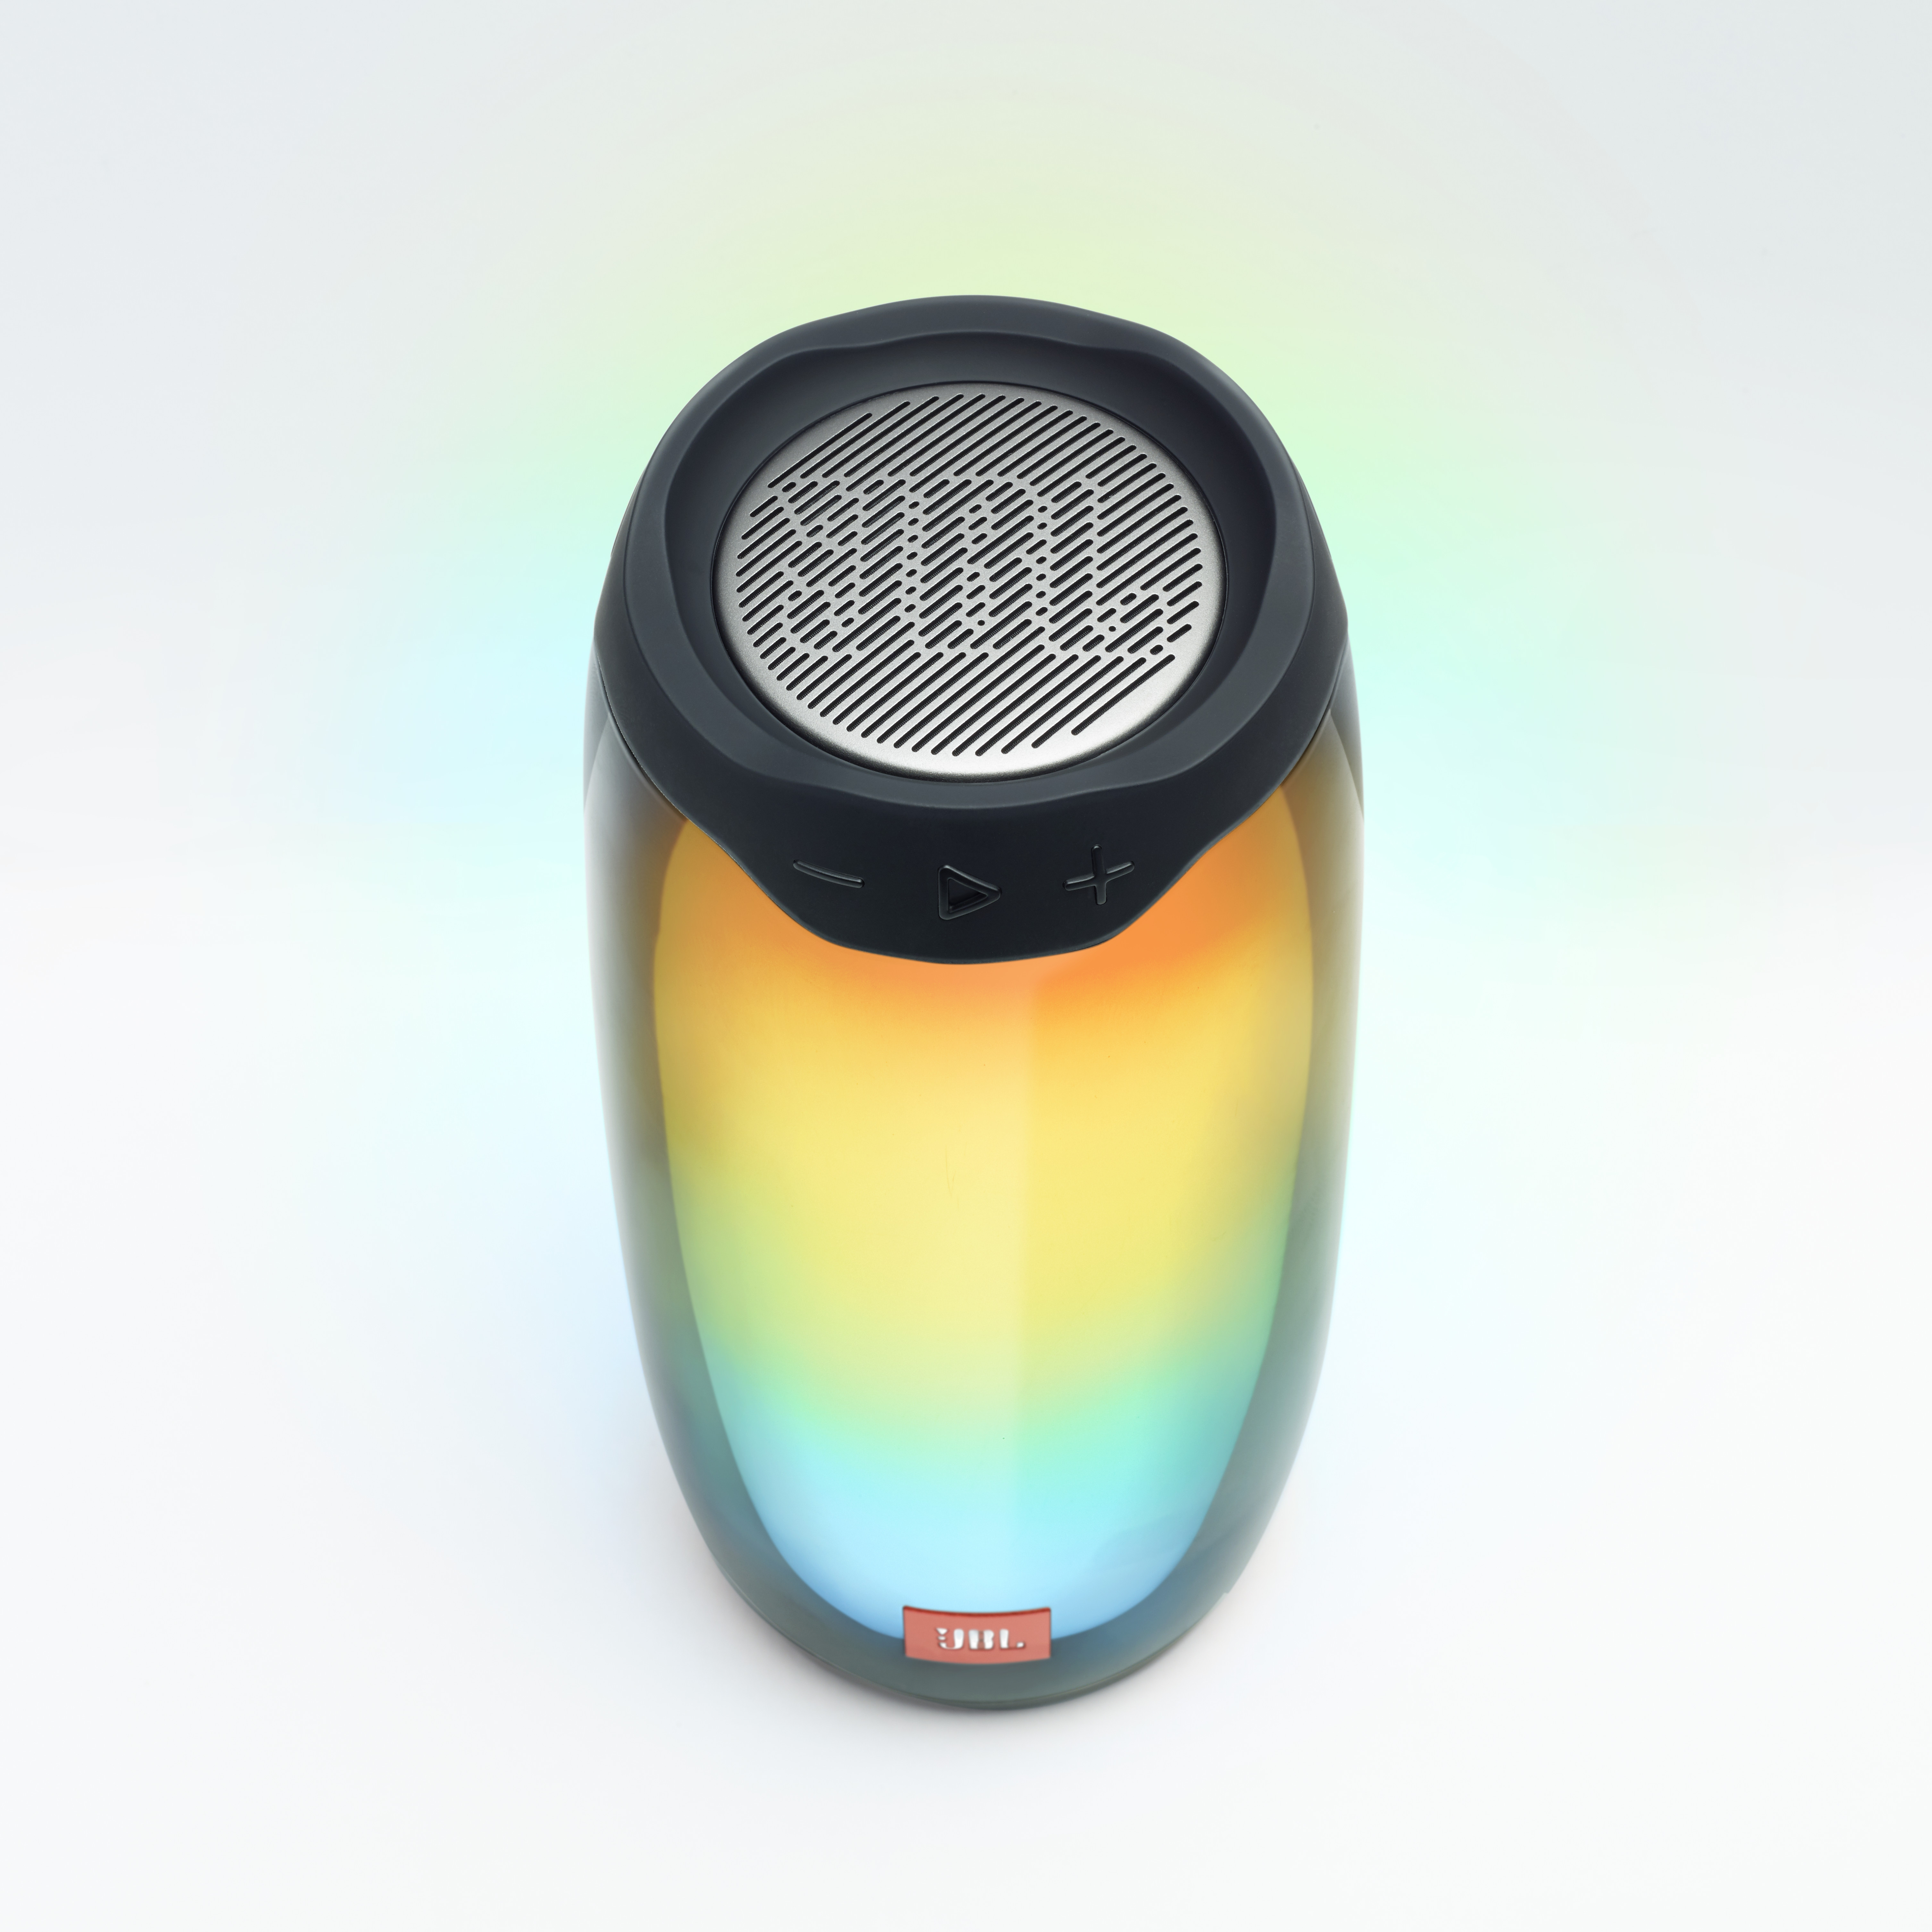 JBL Pulse 4 Waterproof Portable Bluetooth Speaker with Light Show and Sound - Black - image 2 of 10